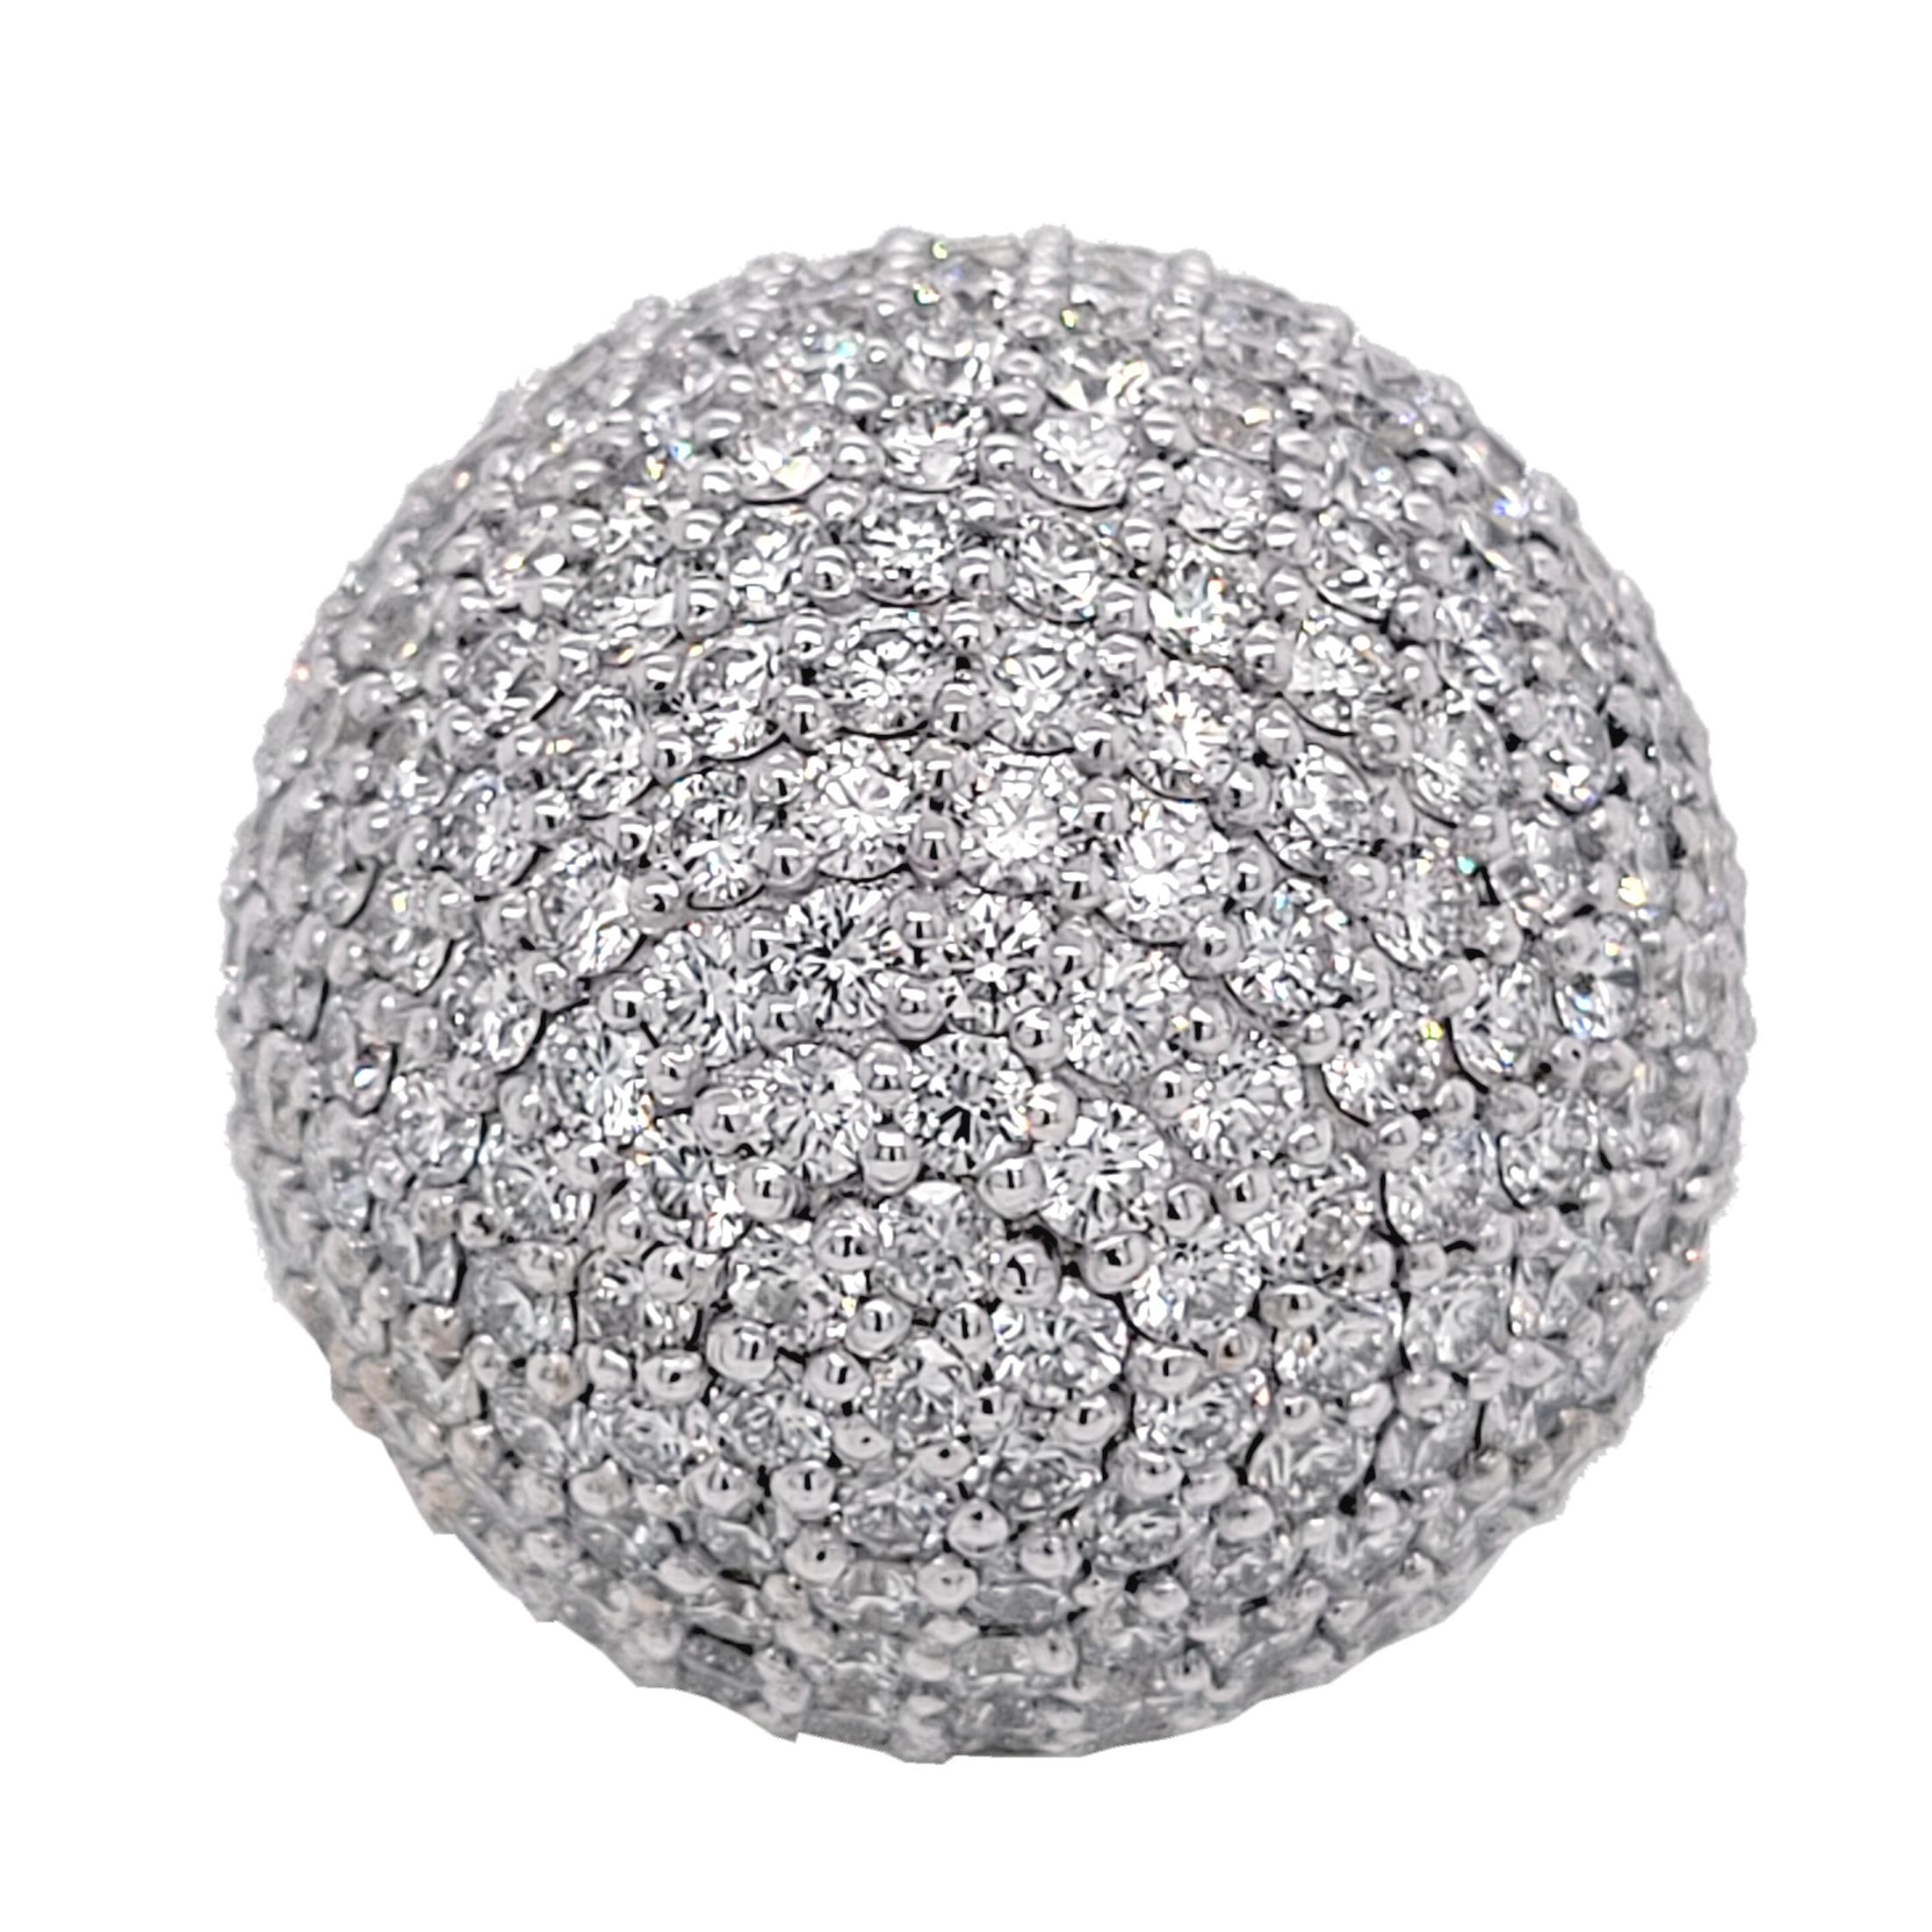 Contemporary 16.10 Ct Diamond studded 14 Karat Gold Pave Set Domed Ball Pendant For Sale